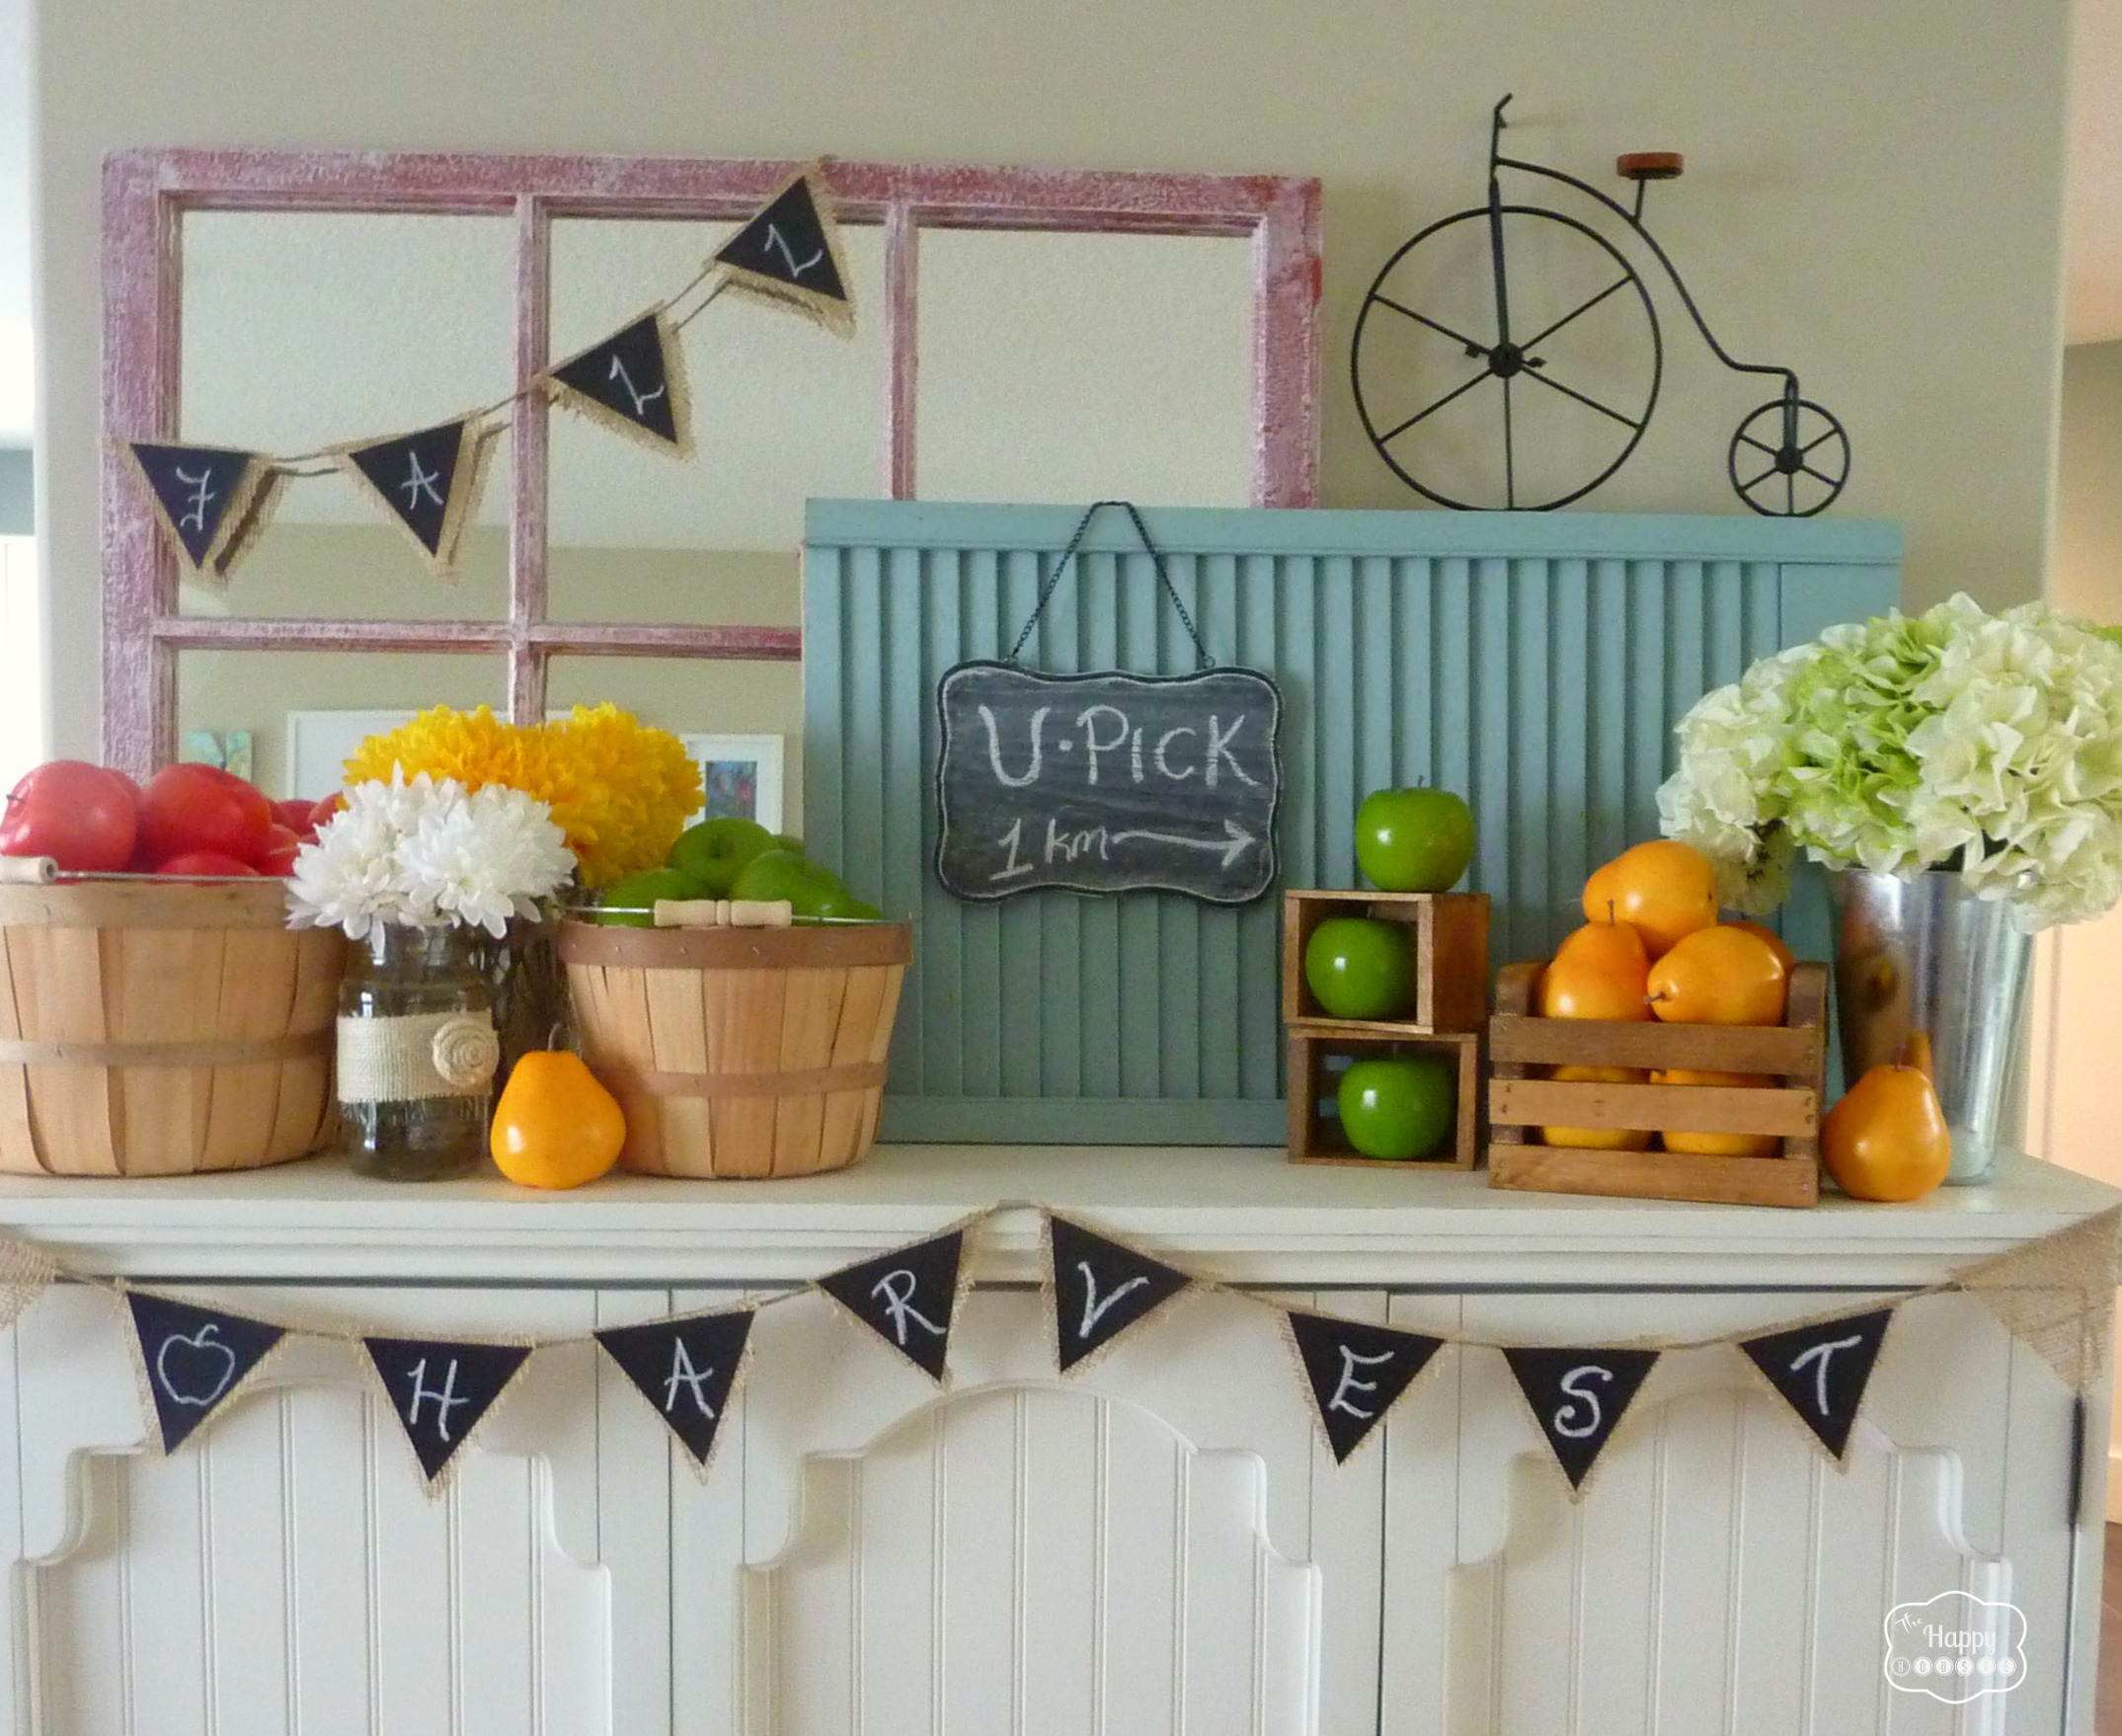 early harvest fall mantel with crates and apples and pears and chalkboard and burlap bunting at thehappyhousie